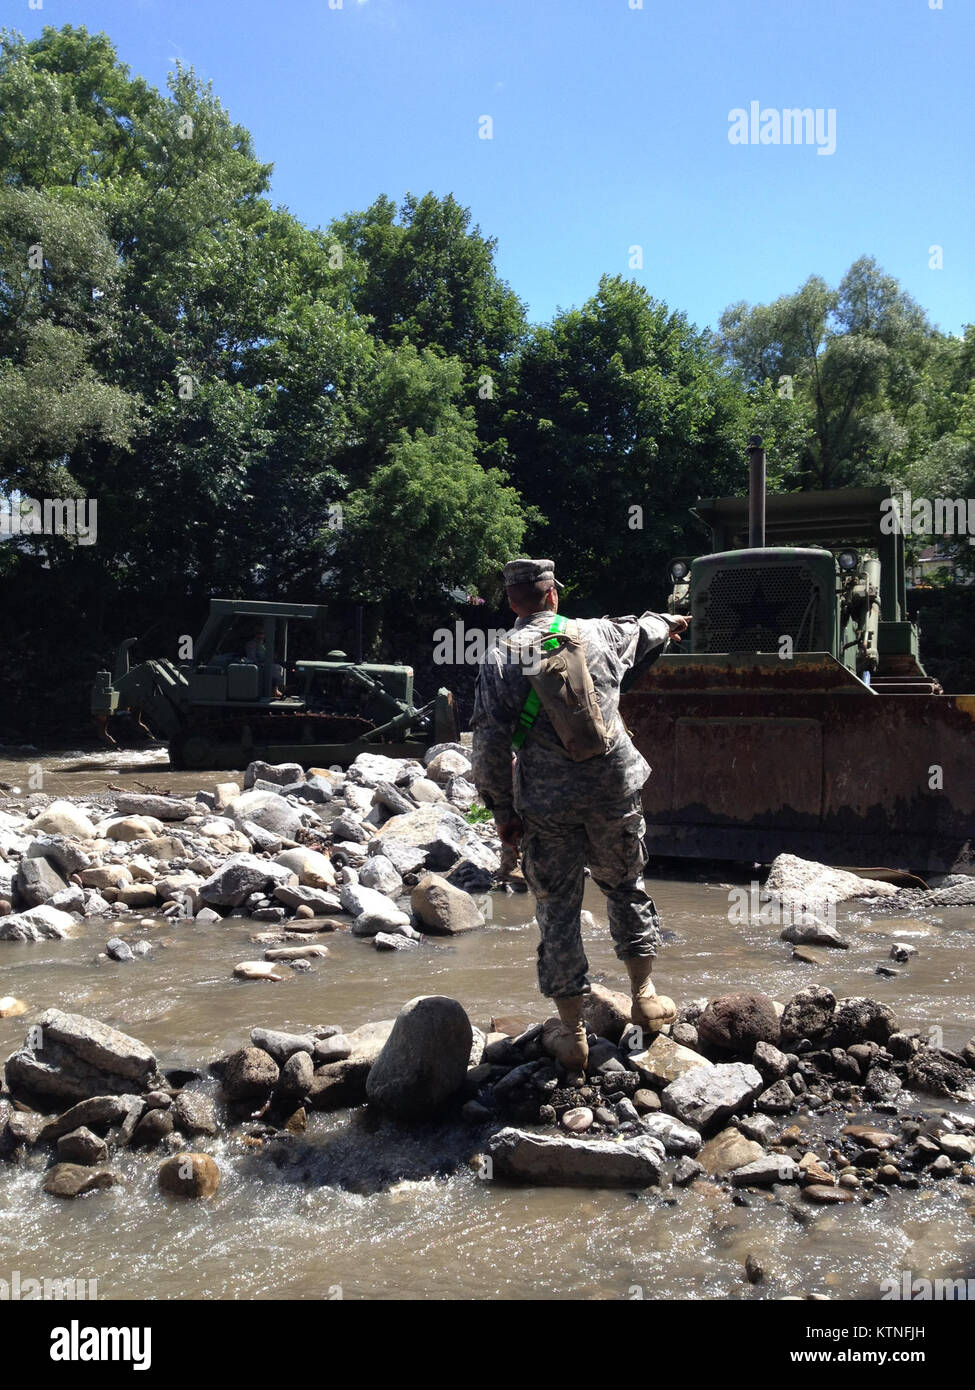 FORT PLAIN, N.Y. -- New York National Guard engineers from Task Force Engineer, a mixed force comprised of forces of the 204th Engineer Battalion, 206th Military Police Company and 1427th Transportation Company assist with debris removal and widening the Otsquago Creek here July 5th following the Guard's recovery support to flash flooding in the Mohawk Valley. The National Guard's initial response force of more than 50 Soldiers on June 28 grew to some 250 Soldiers on July 3 to support local communities in their recovery. U.S. Army photo by Lt. Col. Christopher Panzer, New York National Guard J Stock Photo